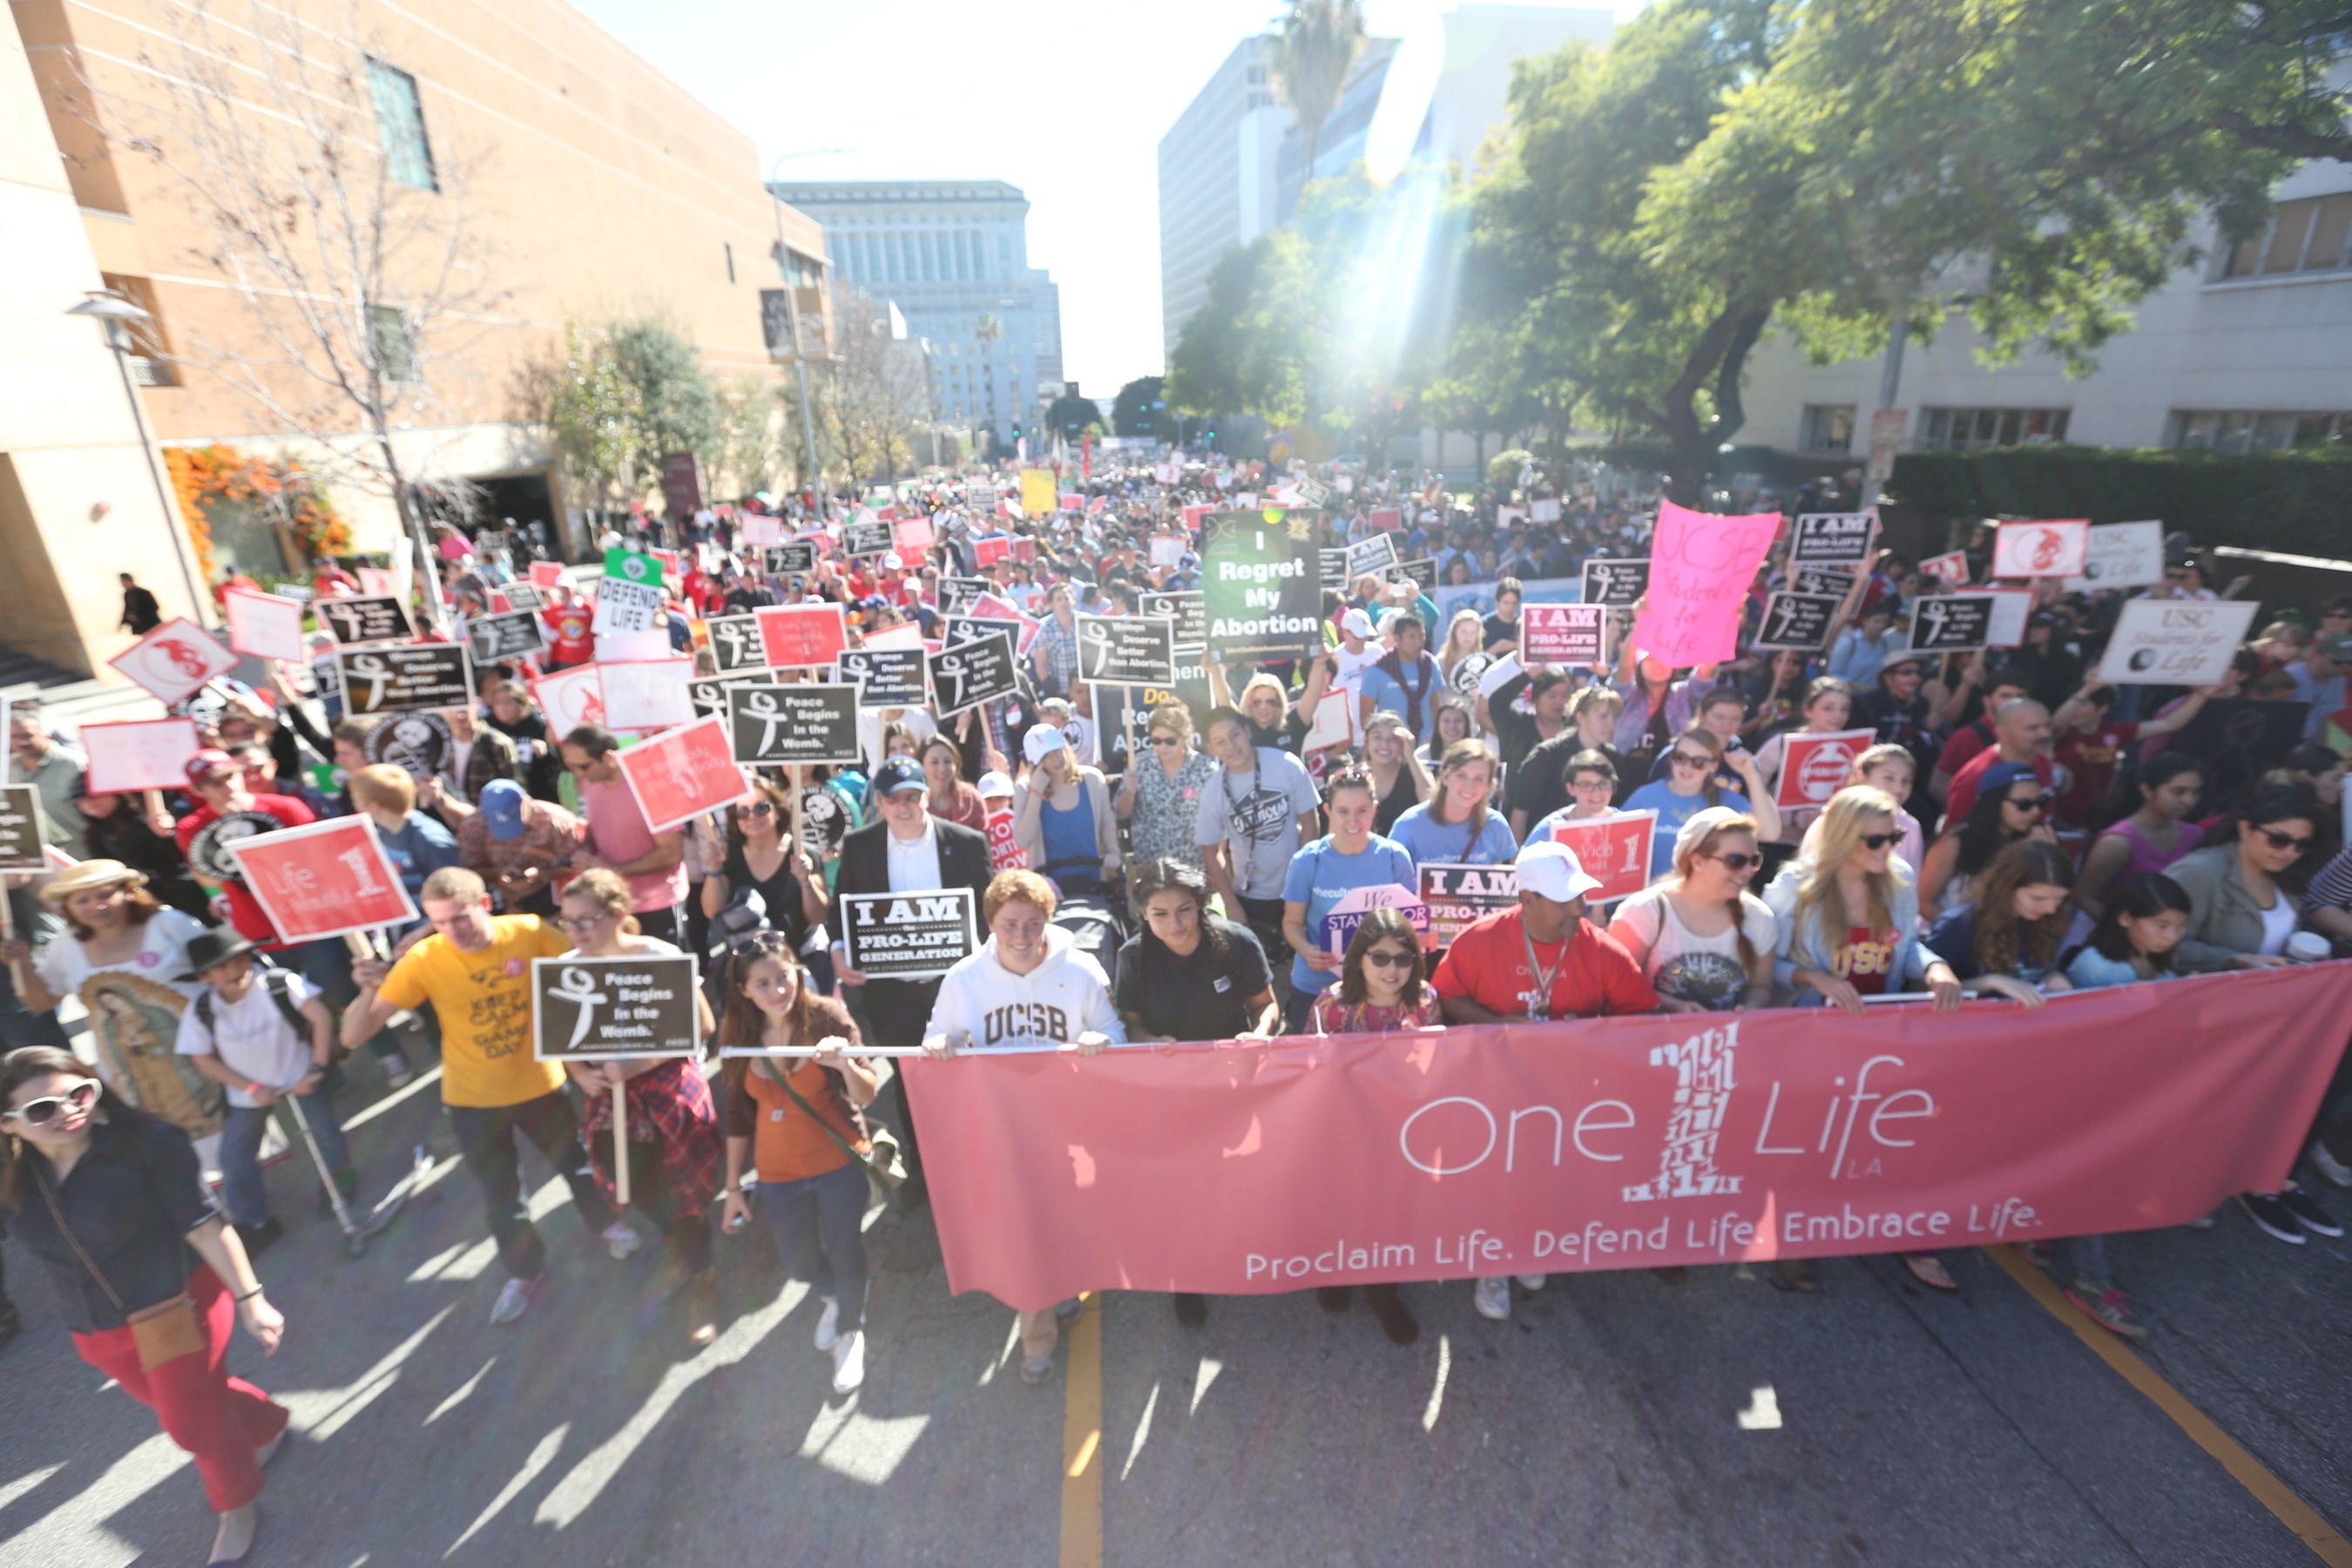 Approximately 15,000 people from throughout Southern California filled the streets of downtown Los Angeles for the first annual OneLife LA, embracing the dignity of every human life.